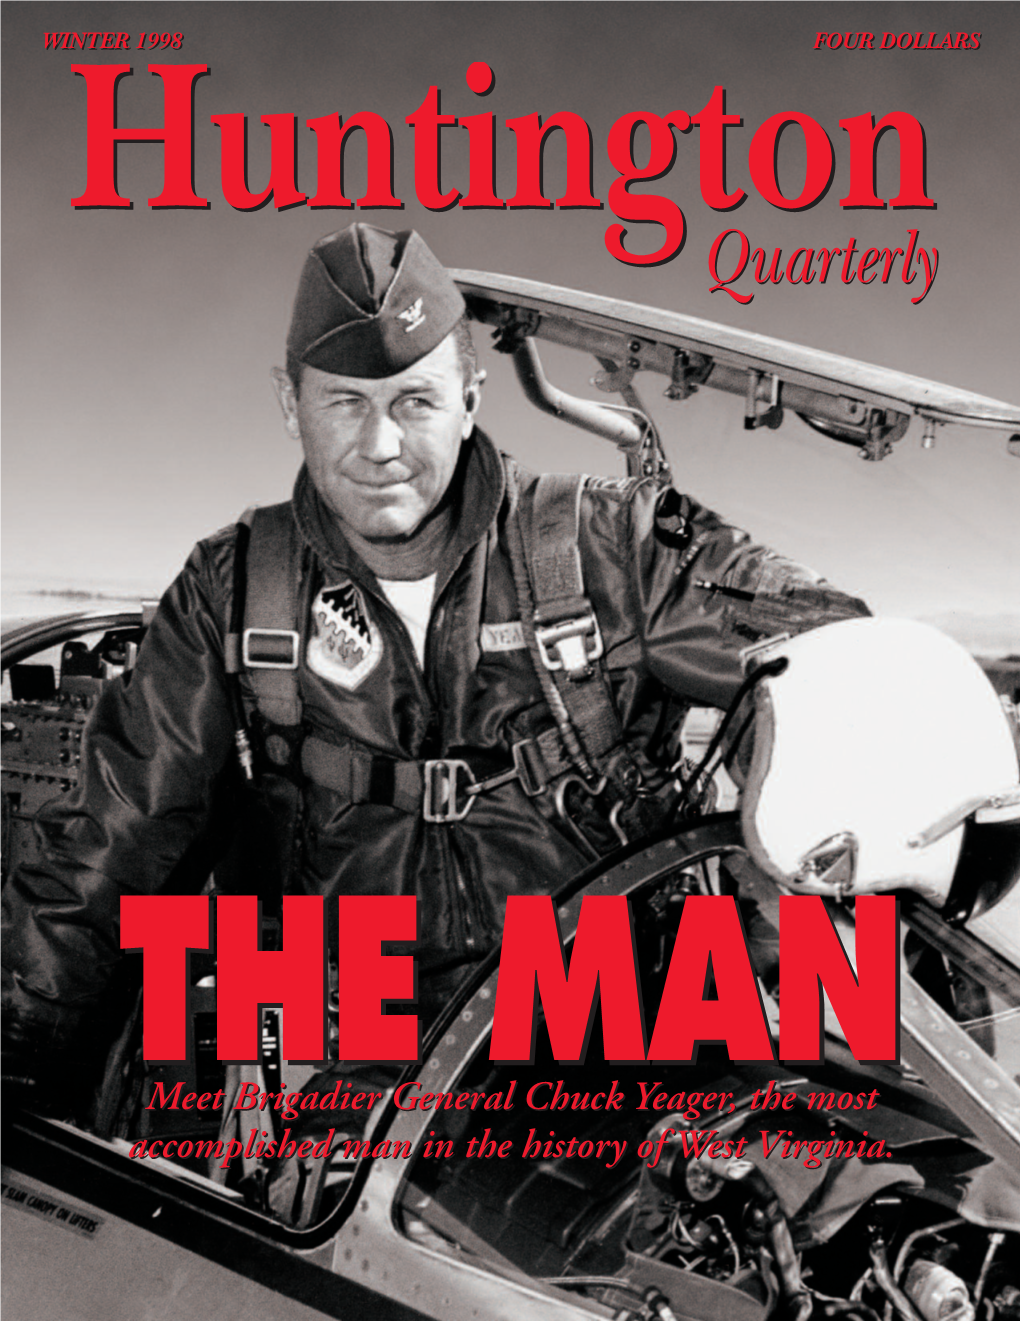 This Article About General Chuck Yeager